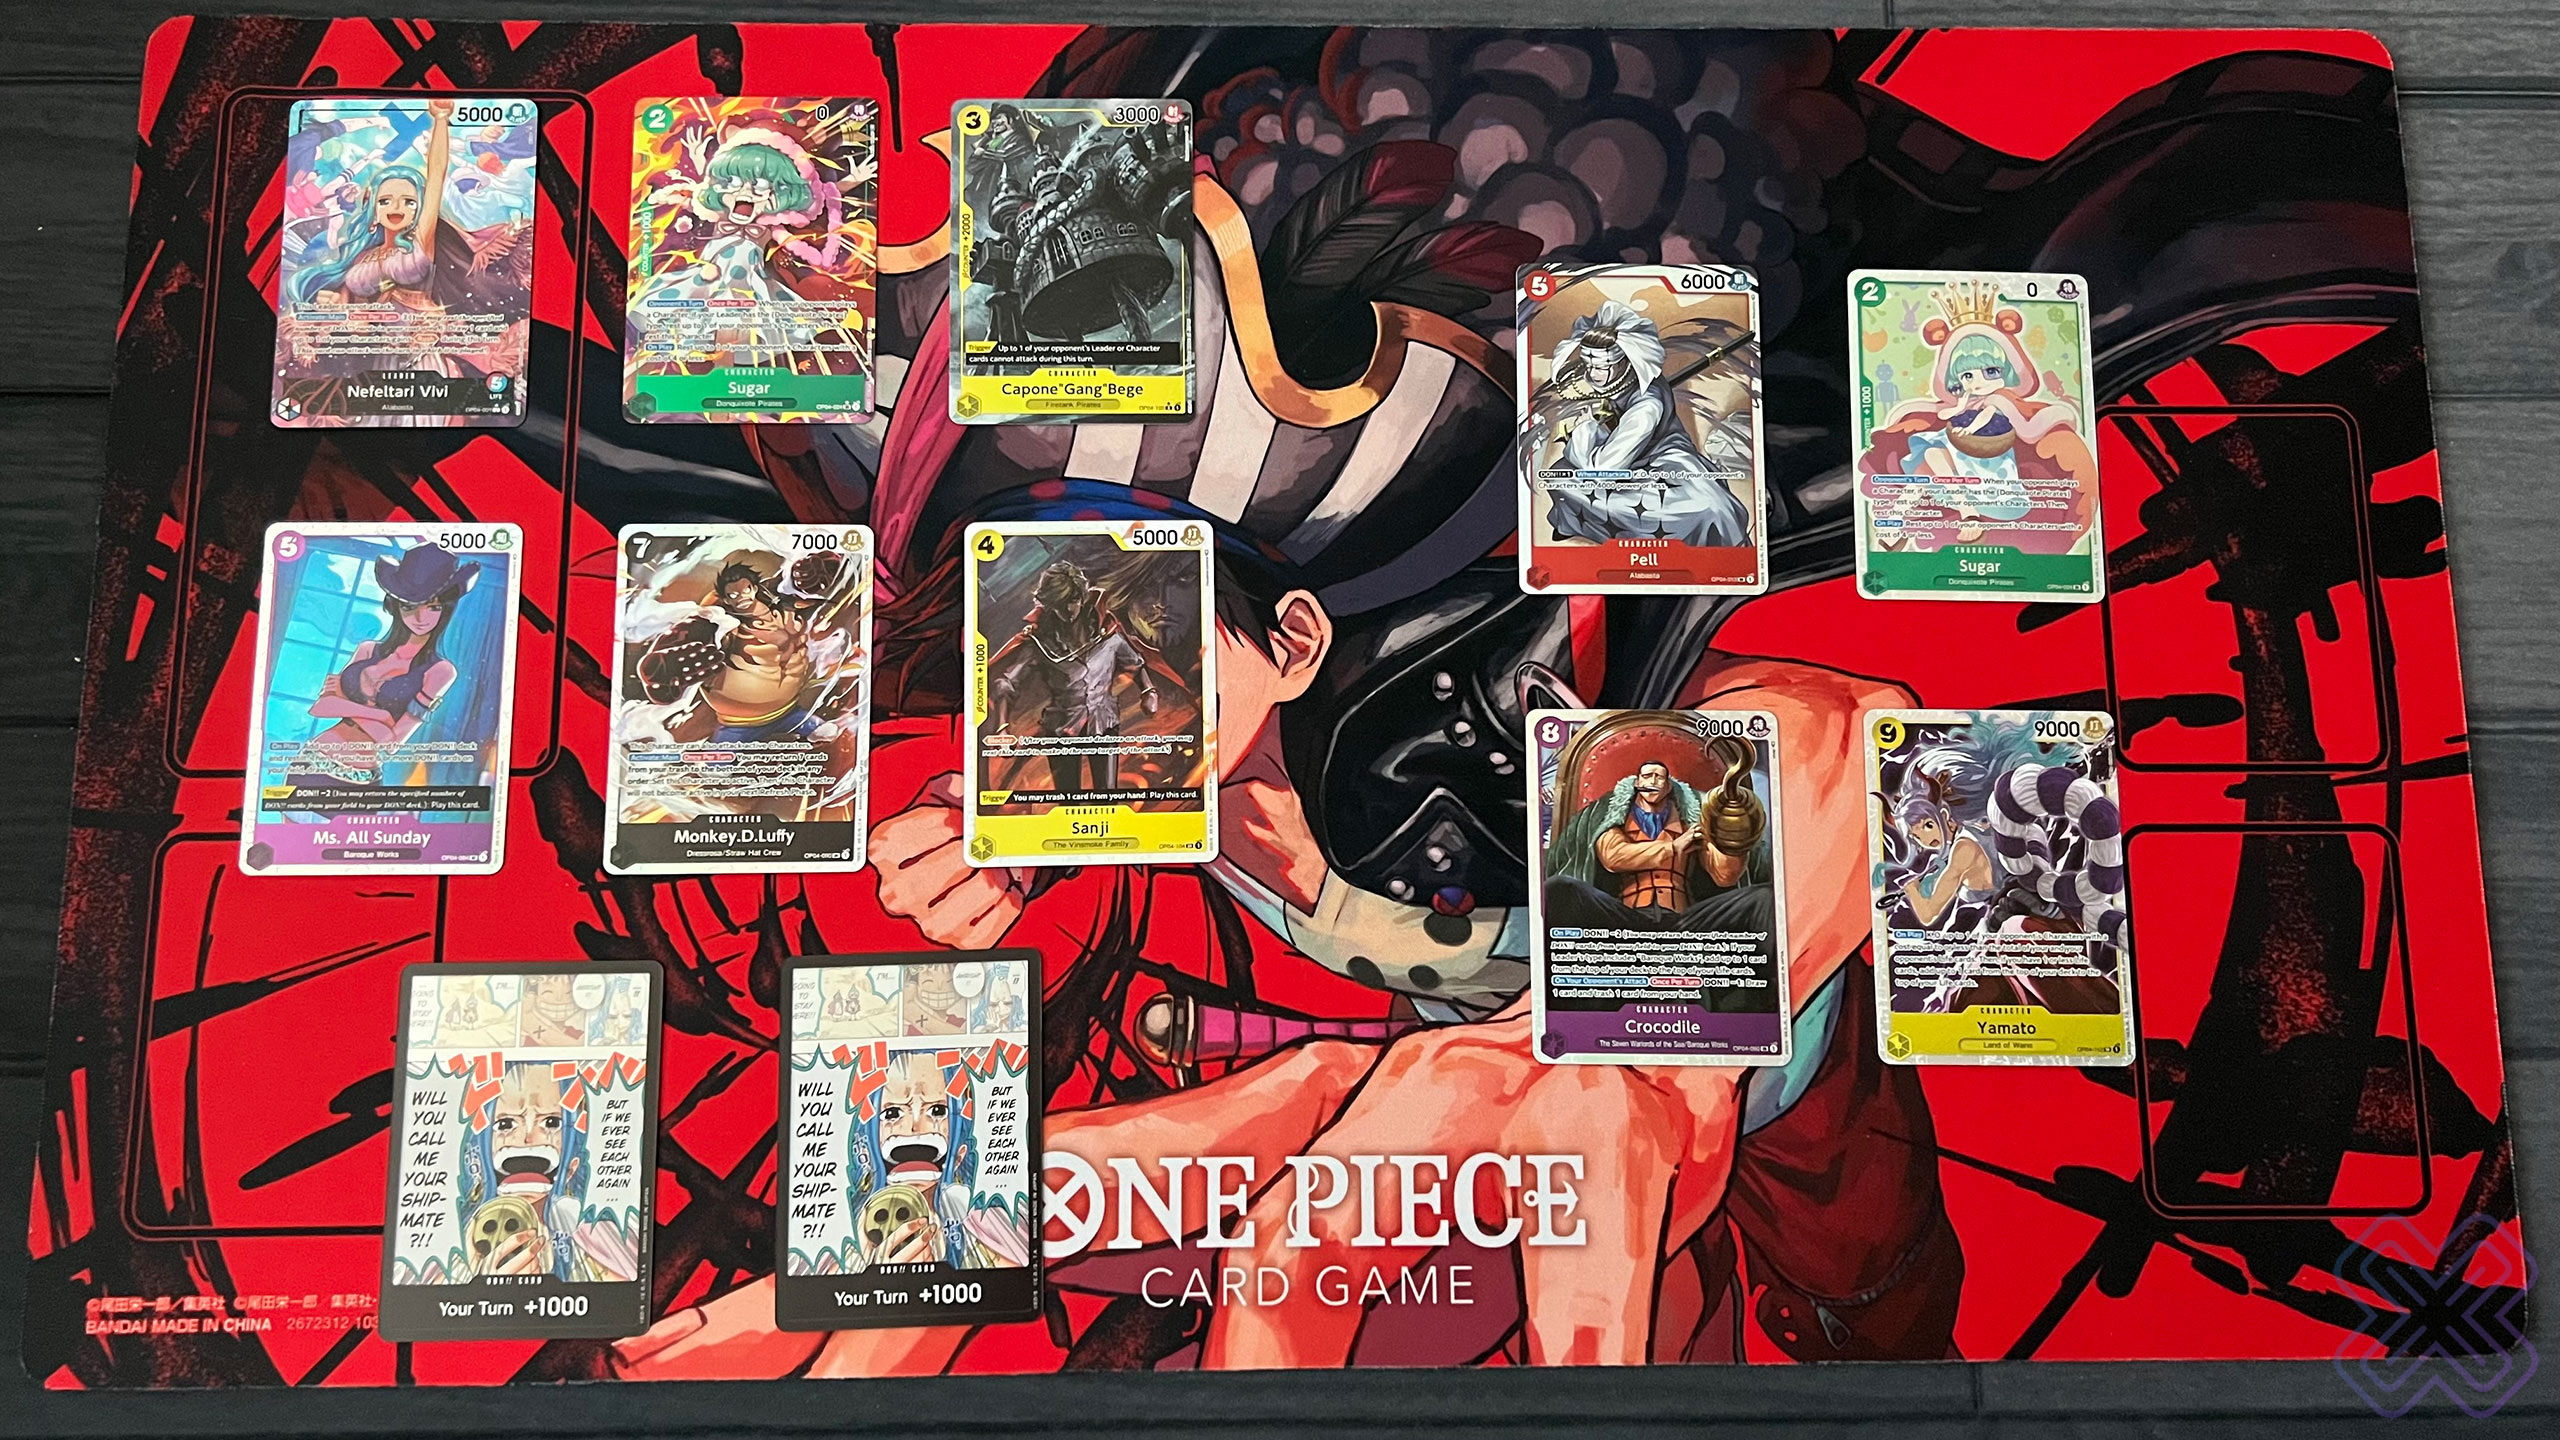 Opening 288 packs of One Piece cards